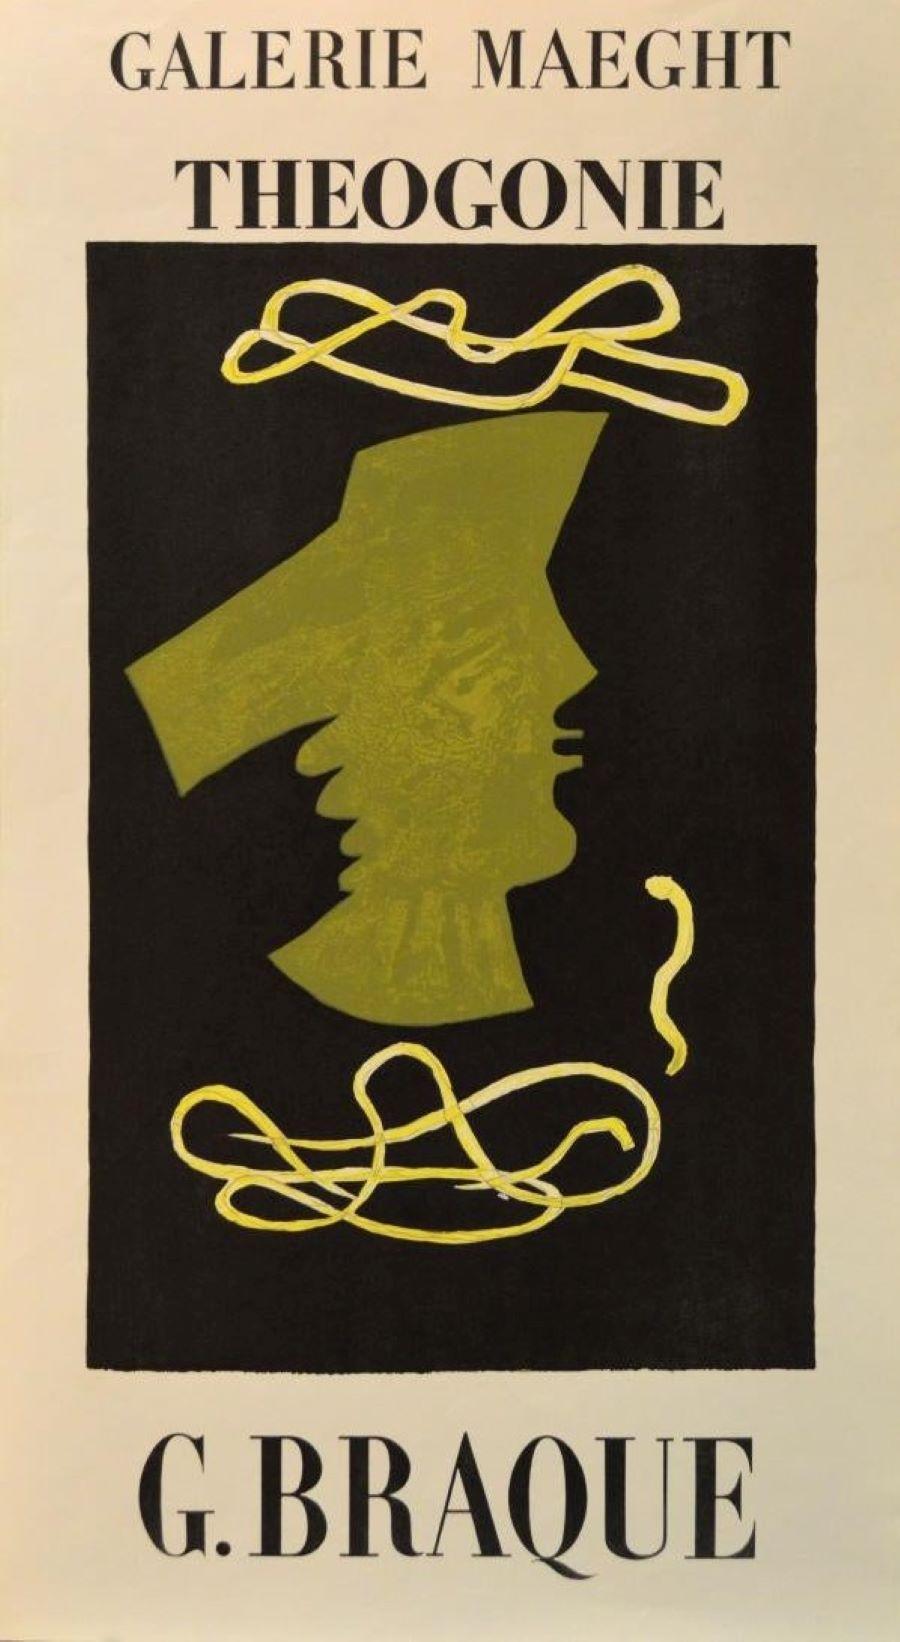 Galerie Maeght, Theogonie, Print featuring the work of Georges Braque